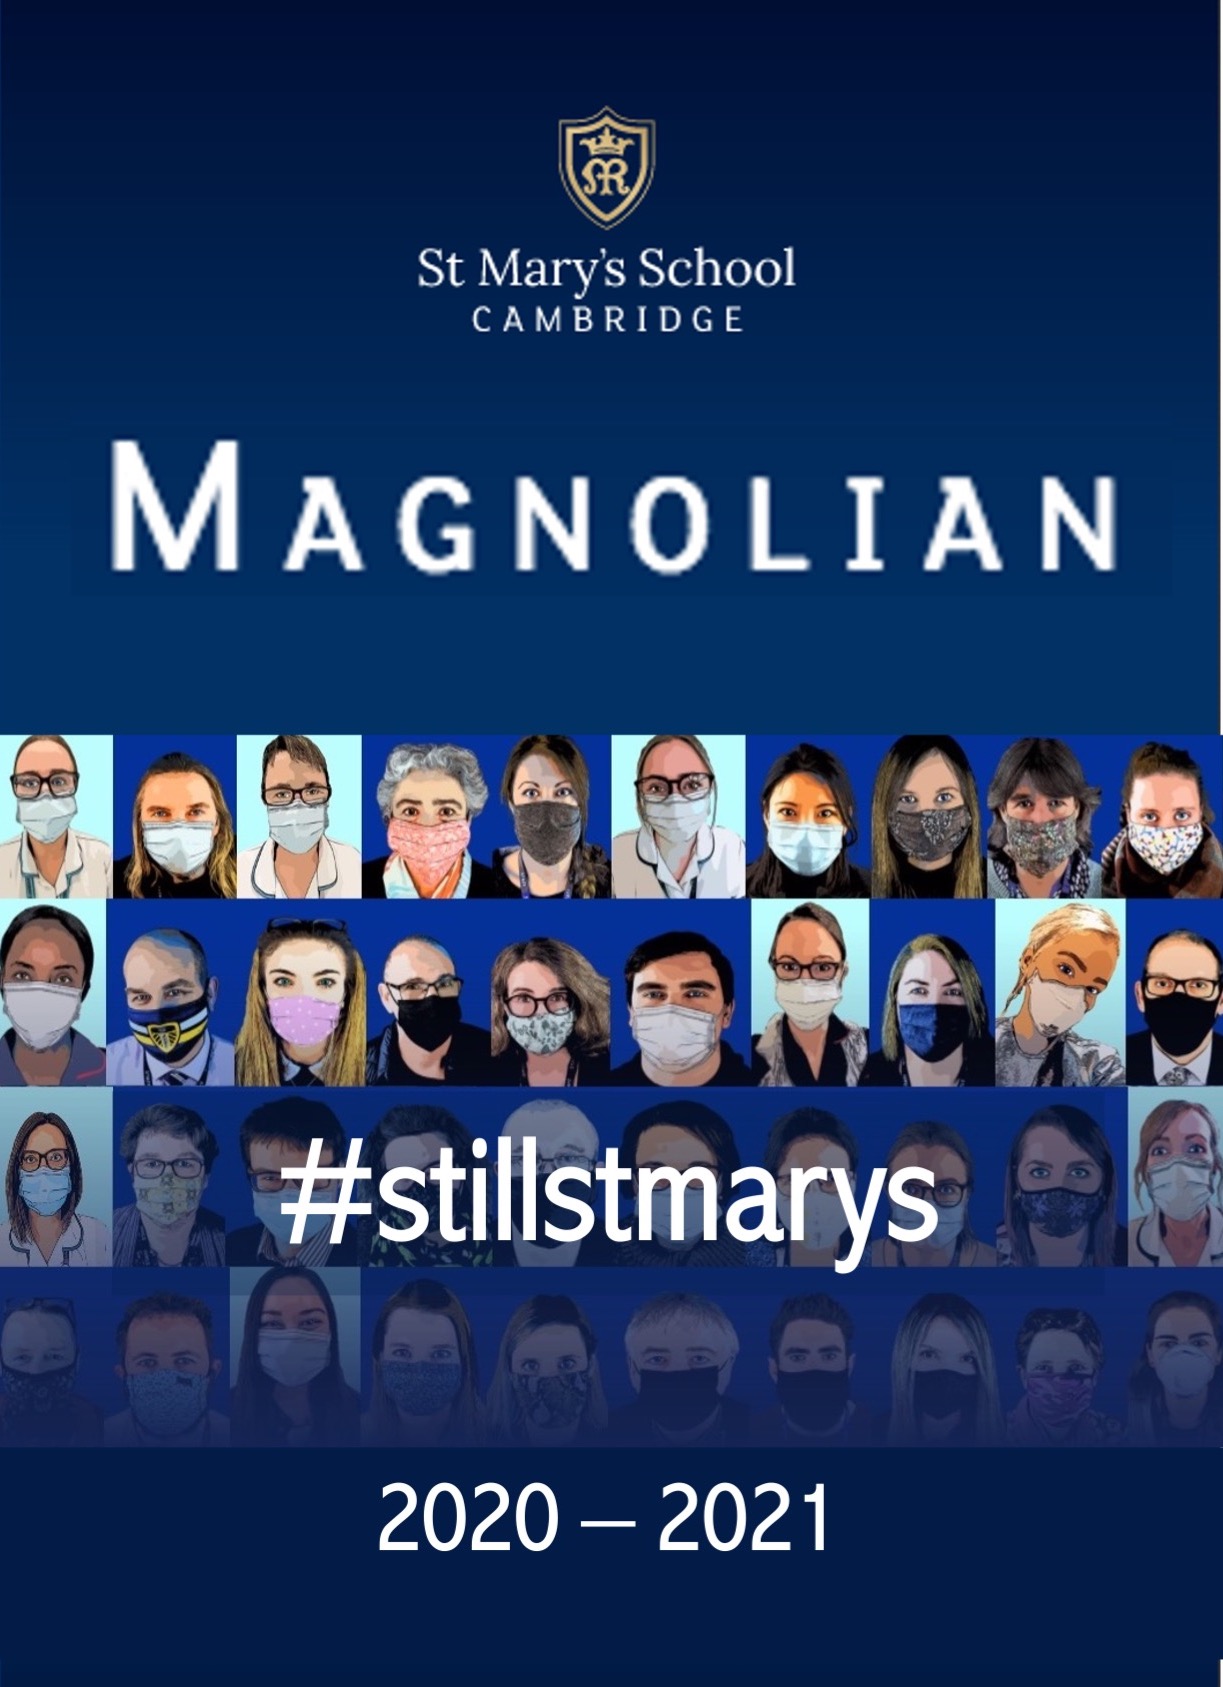 A year at St Mary's